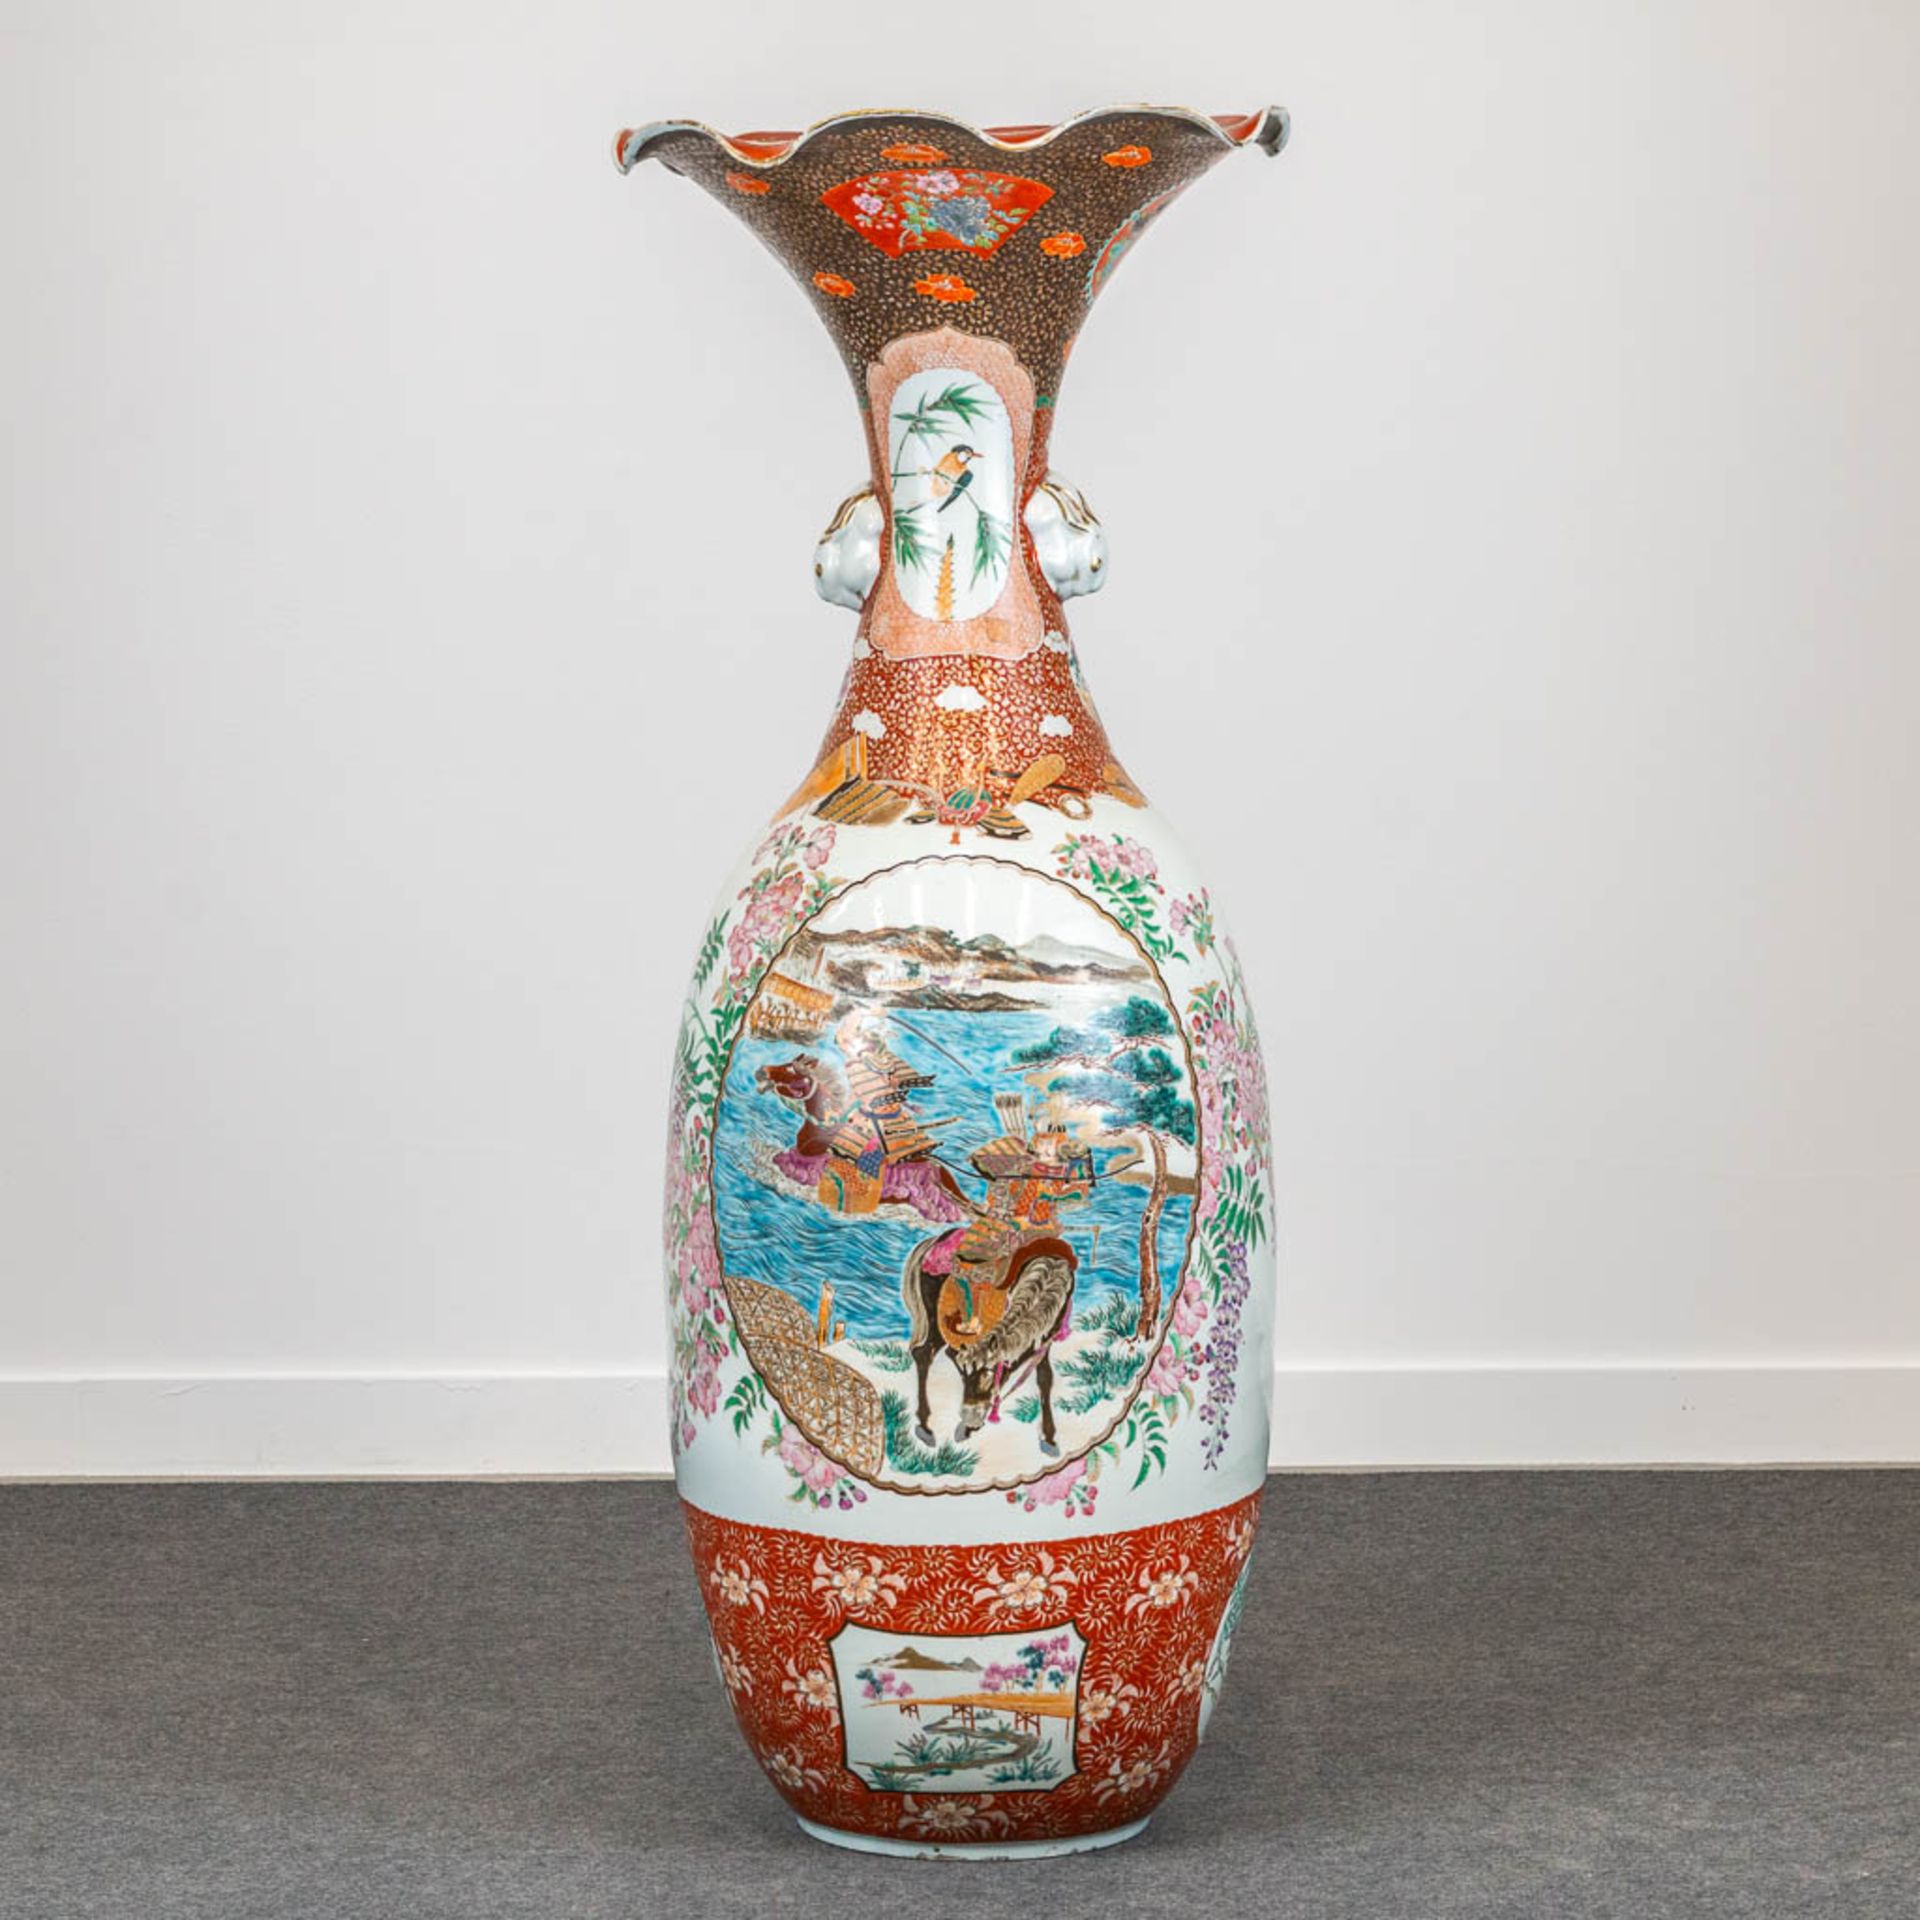 A large vase made of Japansese porcelain, decorated with blossoms. 19th/20th century. (106 x 40 cm) - Image 2 of 9